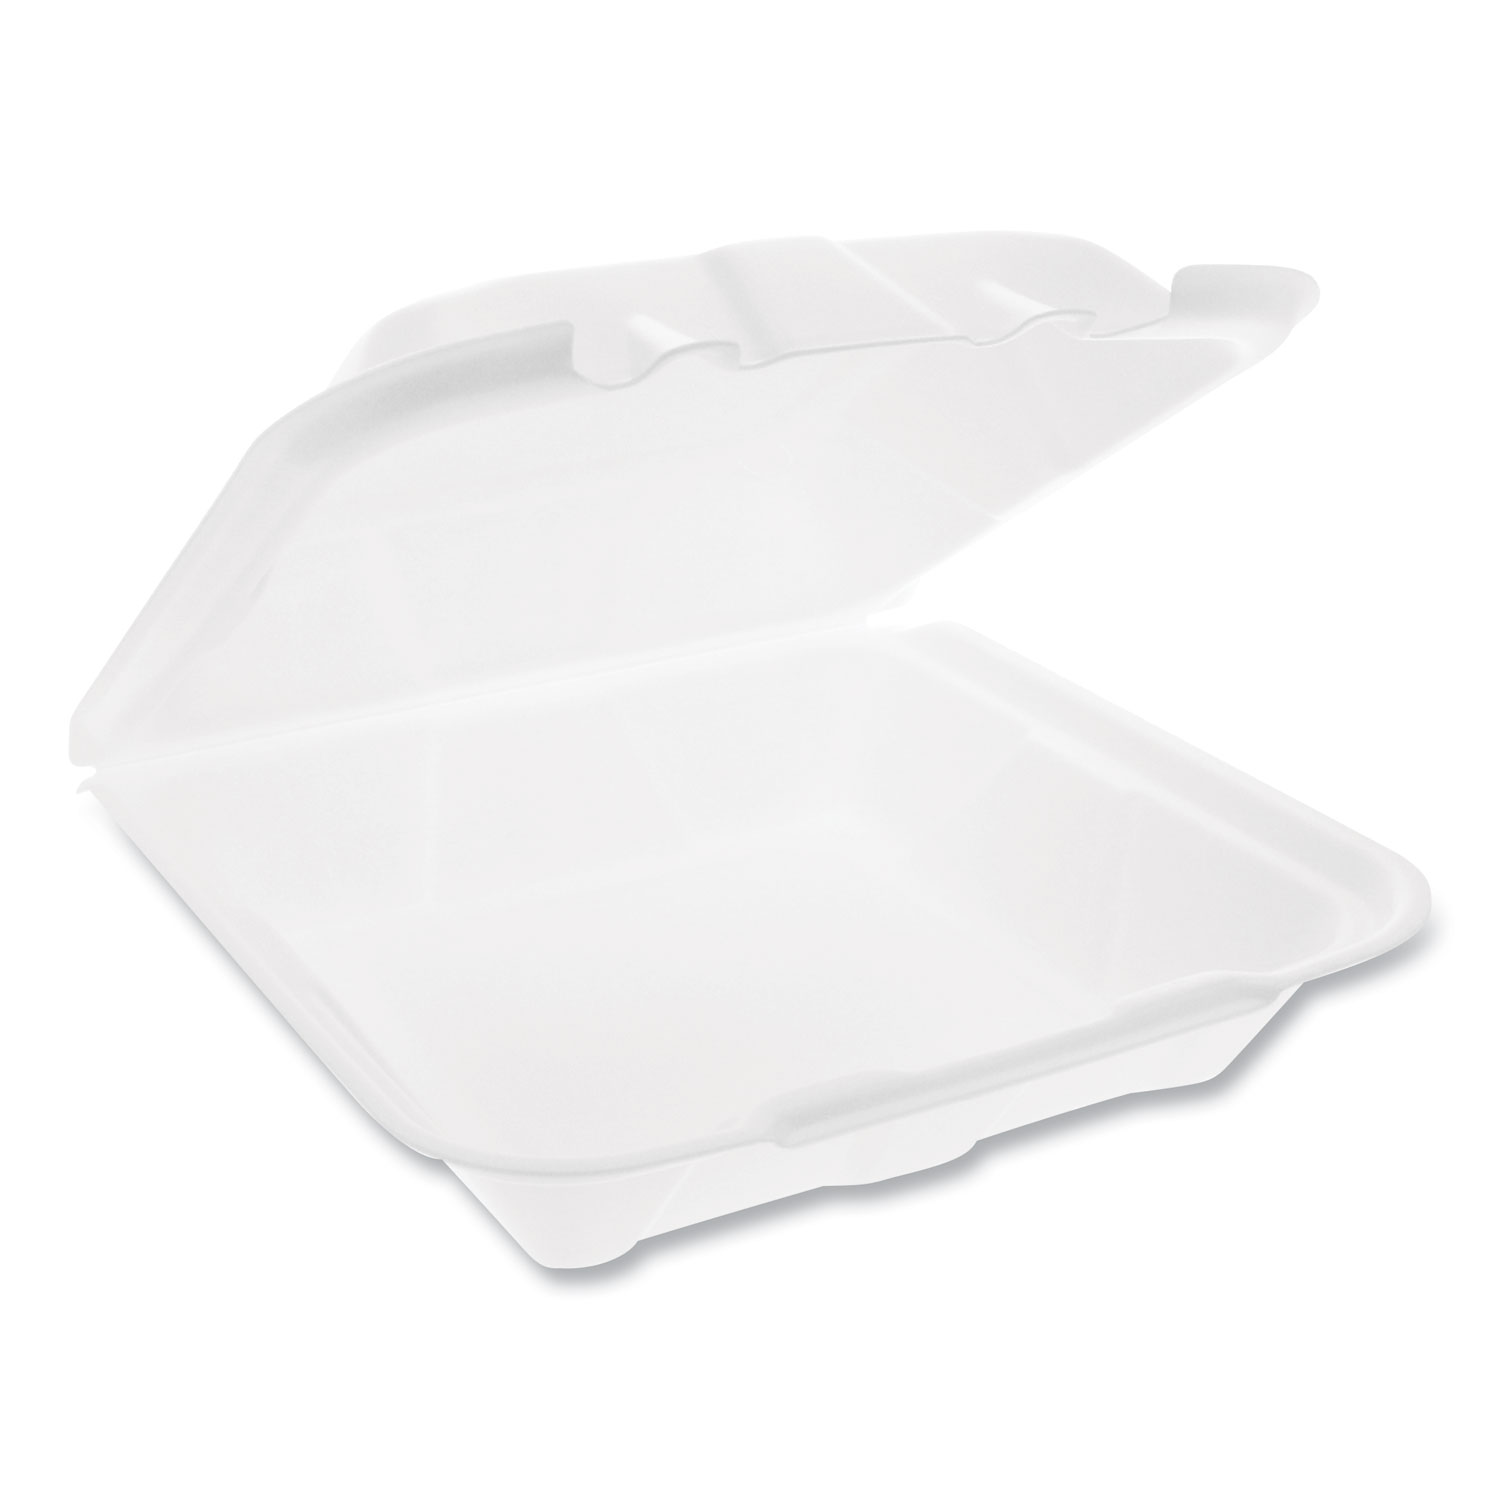  Pactiv YTD19901ECON Foam Hinged Lid Containers, Dual Tab Lock Economy, 9.13 x 9 x 3.25, 1-Compartment, White, 150/Carton (PCTYTD19901ECON) 